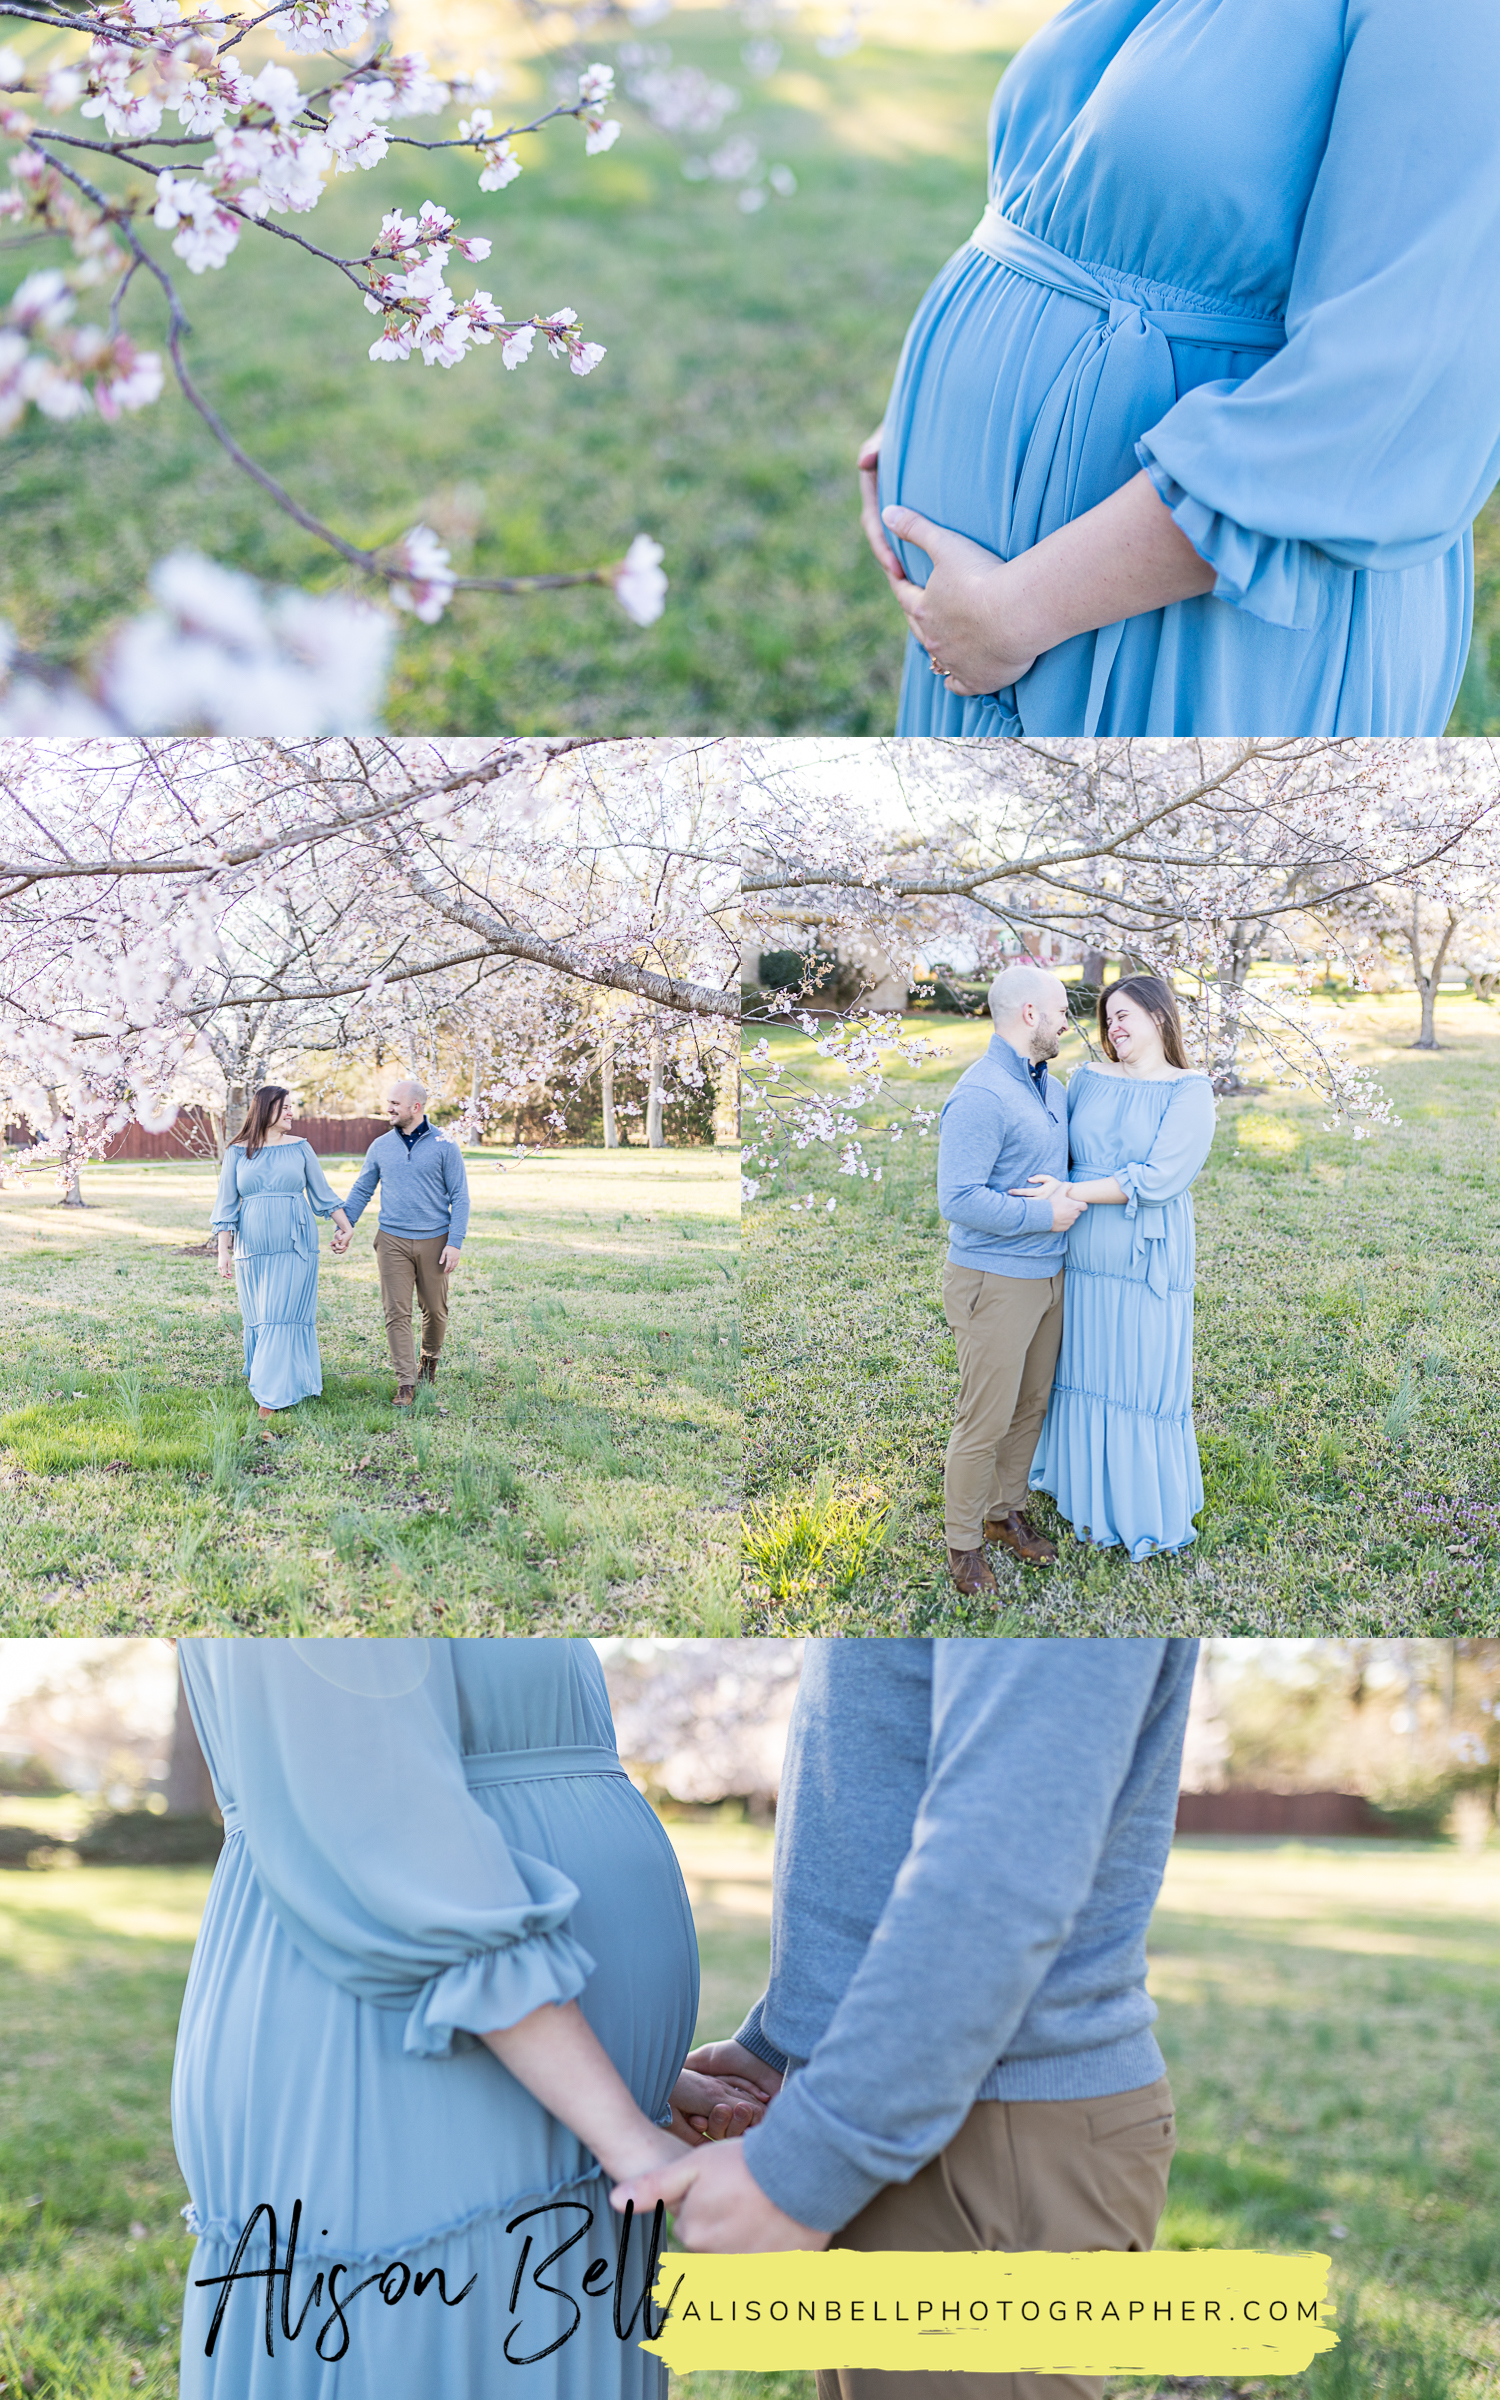 Spring maternity photo session with cherry blossoms in virginia beach, va by alisonbell photographer